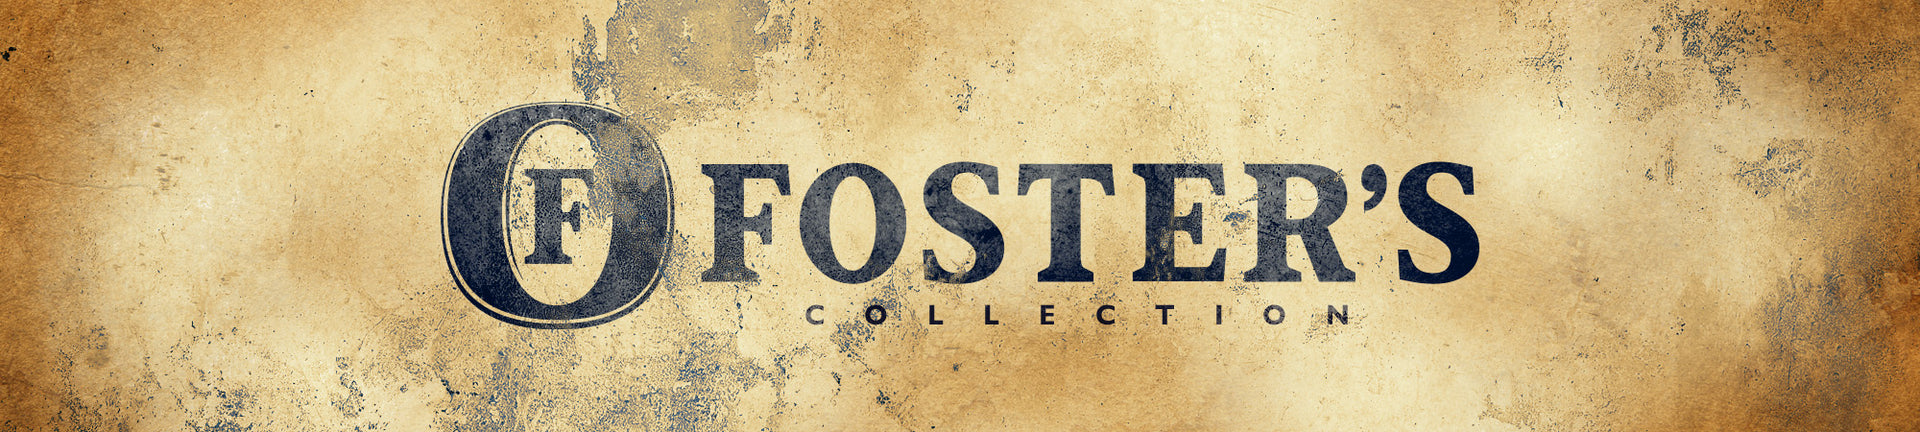 Foster's Shirts & Apparel